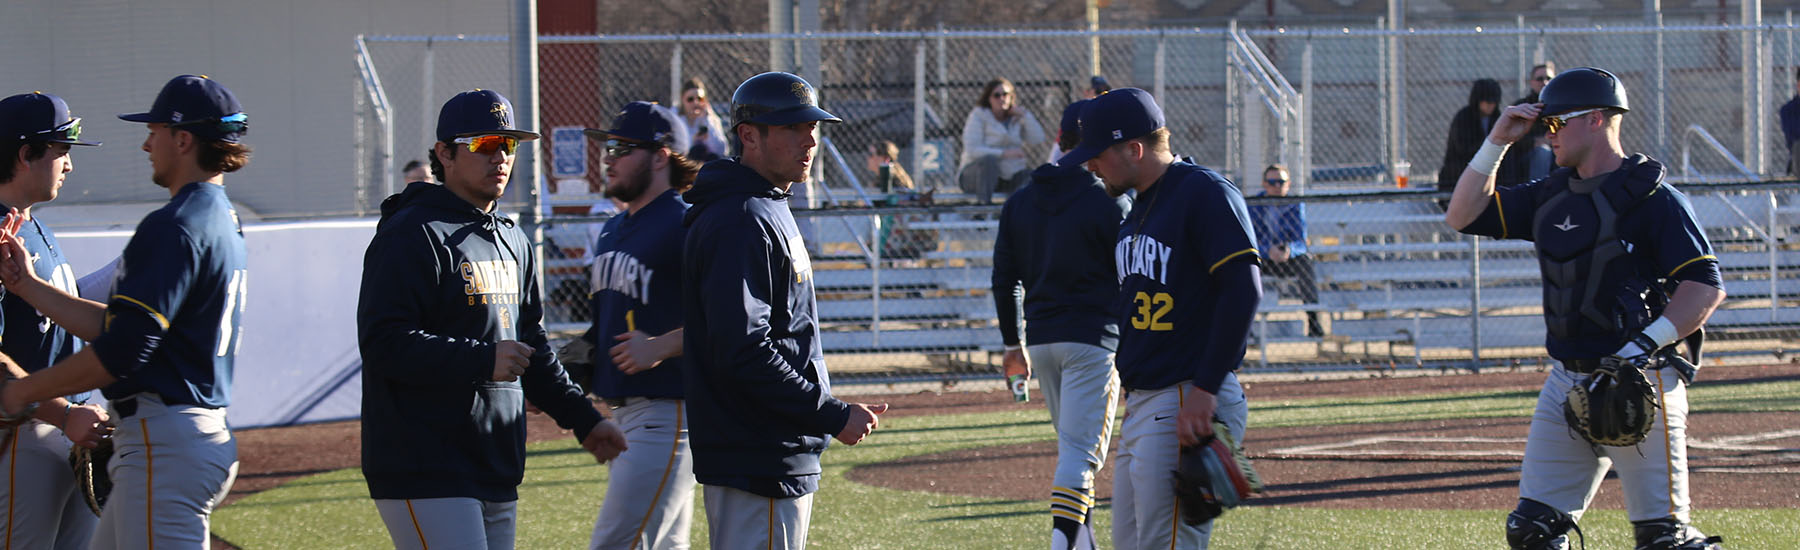 Spires Fall to William Penn 8-6